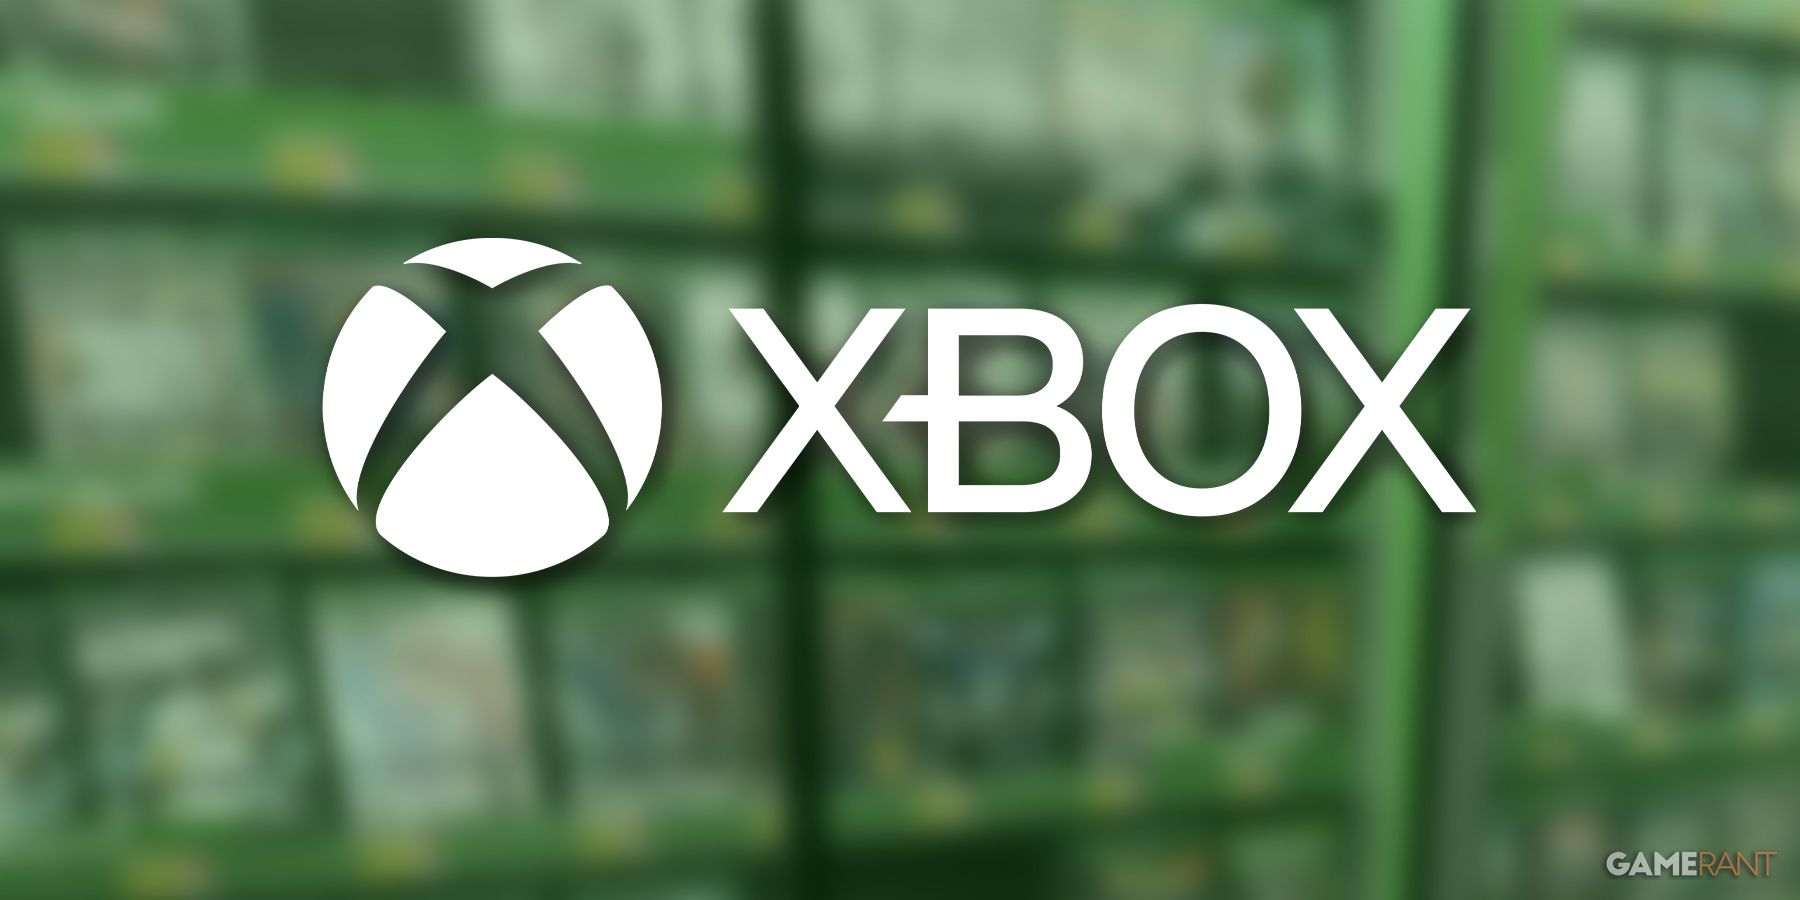 xbox logo over blurred retail display